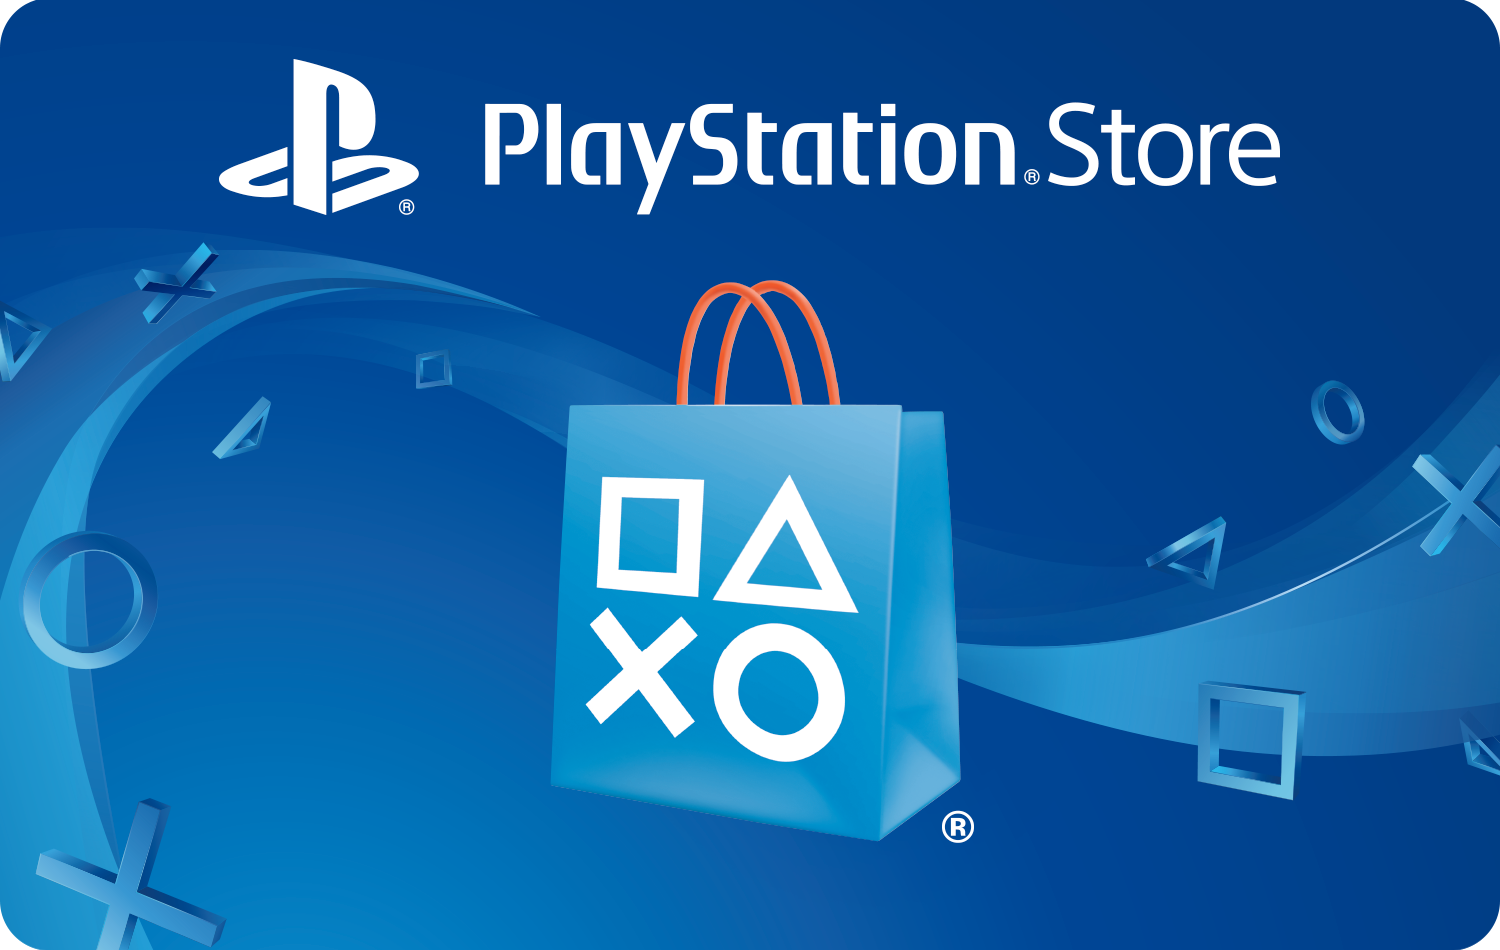 Playstation network poland. PLAYSTATION Store. PLAYSTATION Store Gift Card. Российский PS Store. Магазин PLAYSTATION.